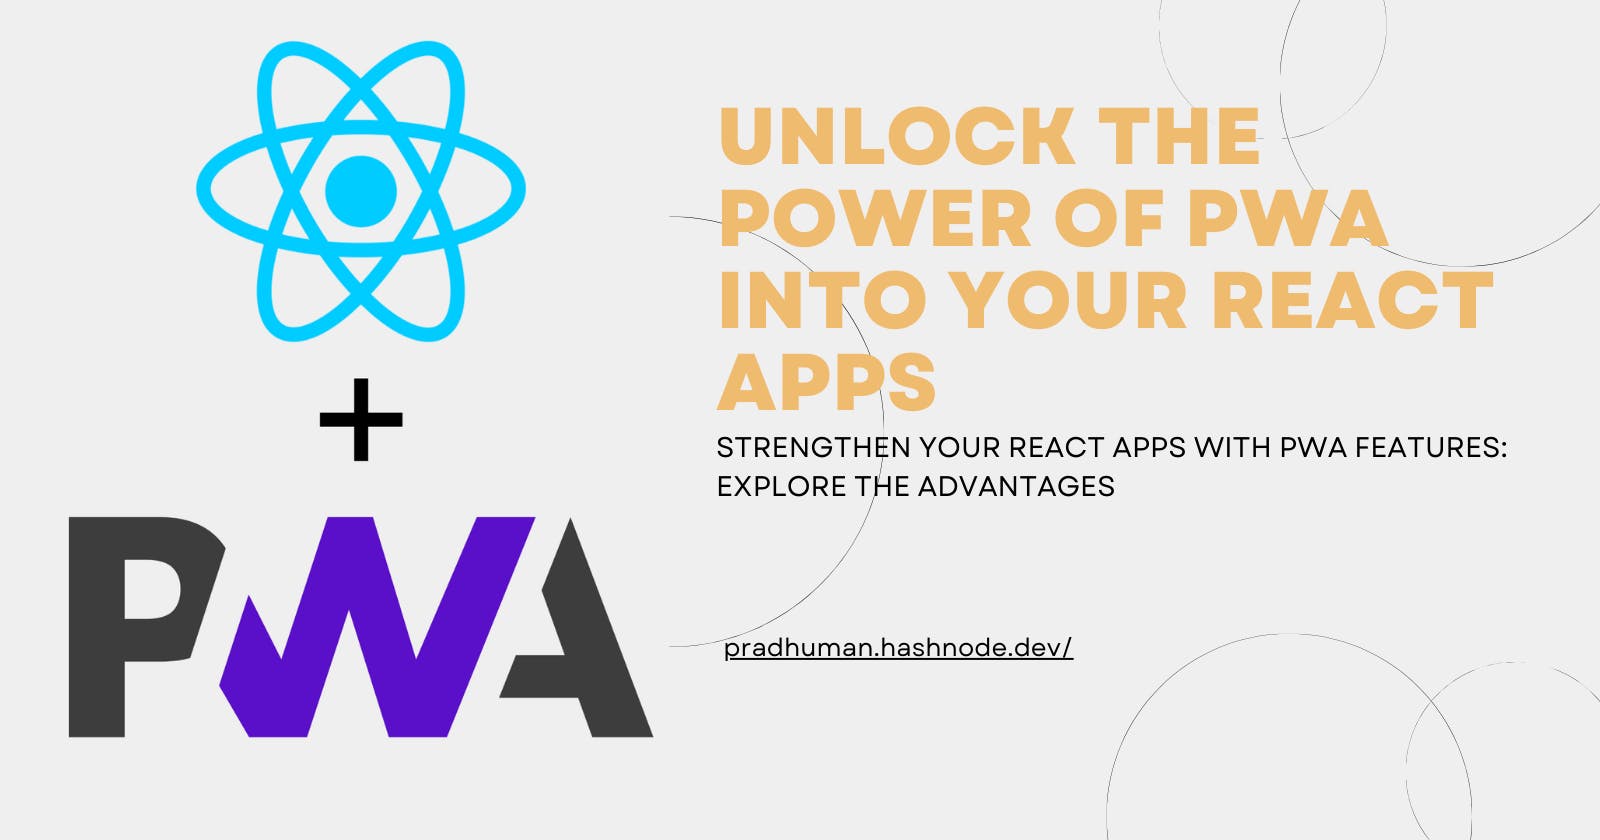 Unlock the power of PWA into your React Apps